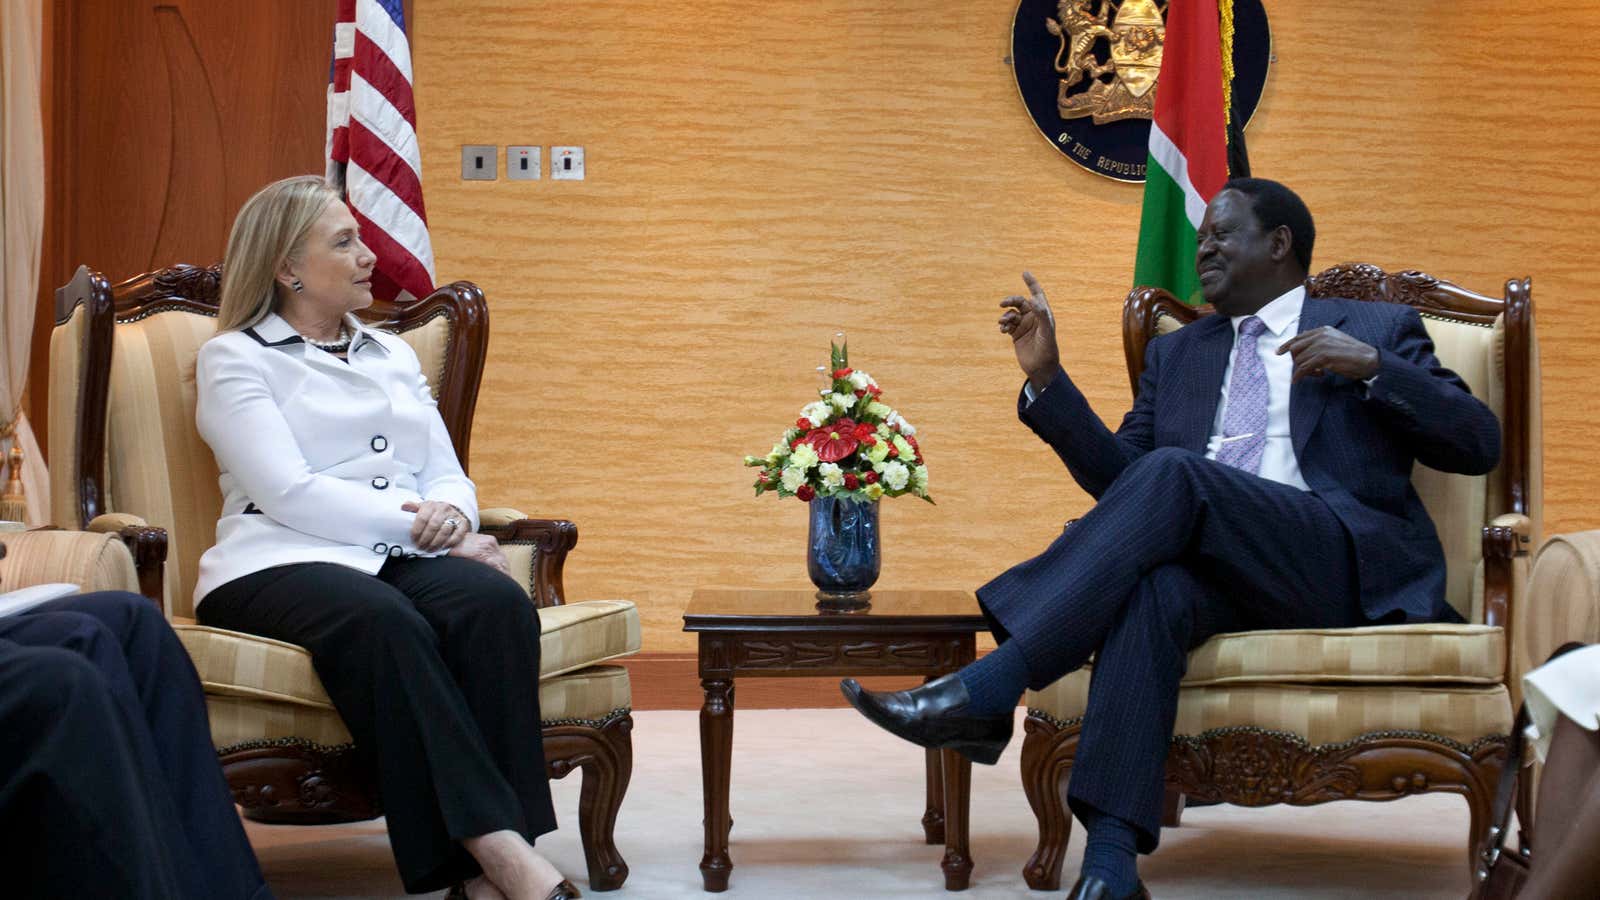 Former U.S. Secretary of State Hillary Rodham Clinton meets with the then Kenya’s Prime Minister, Raila Odinga in 2012.